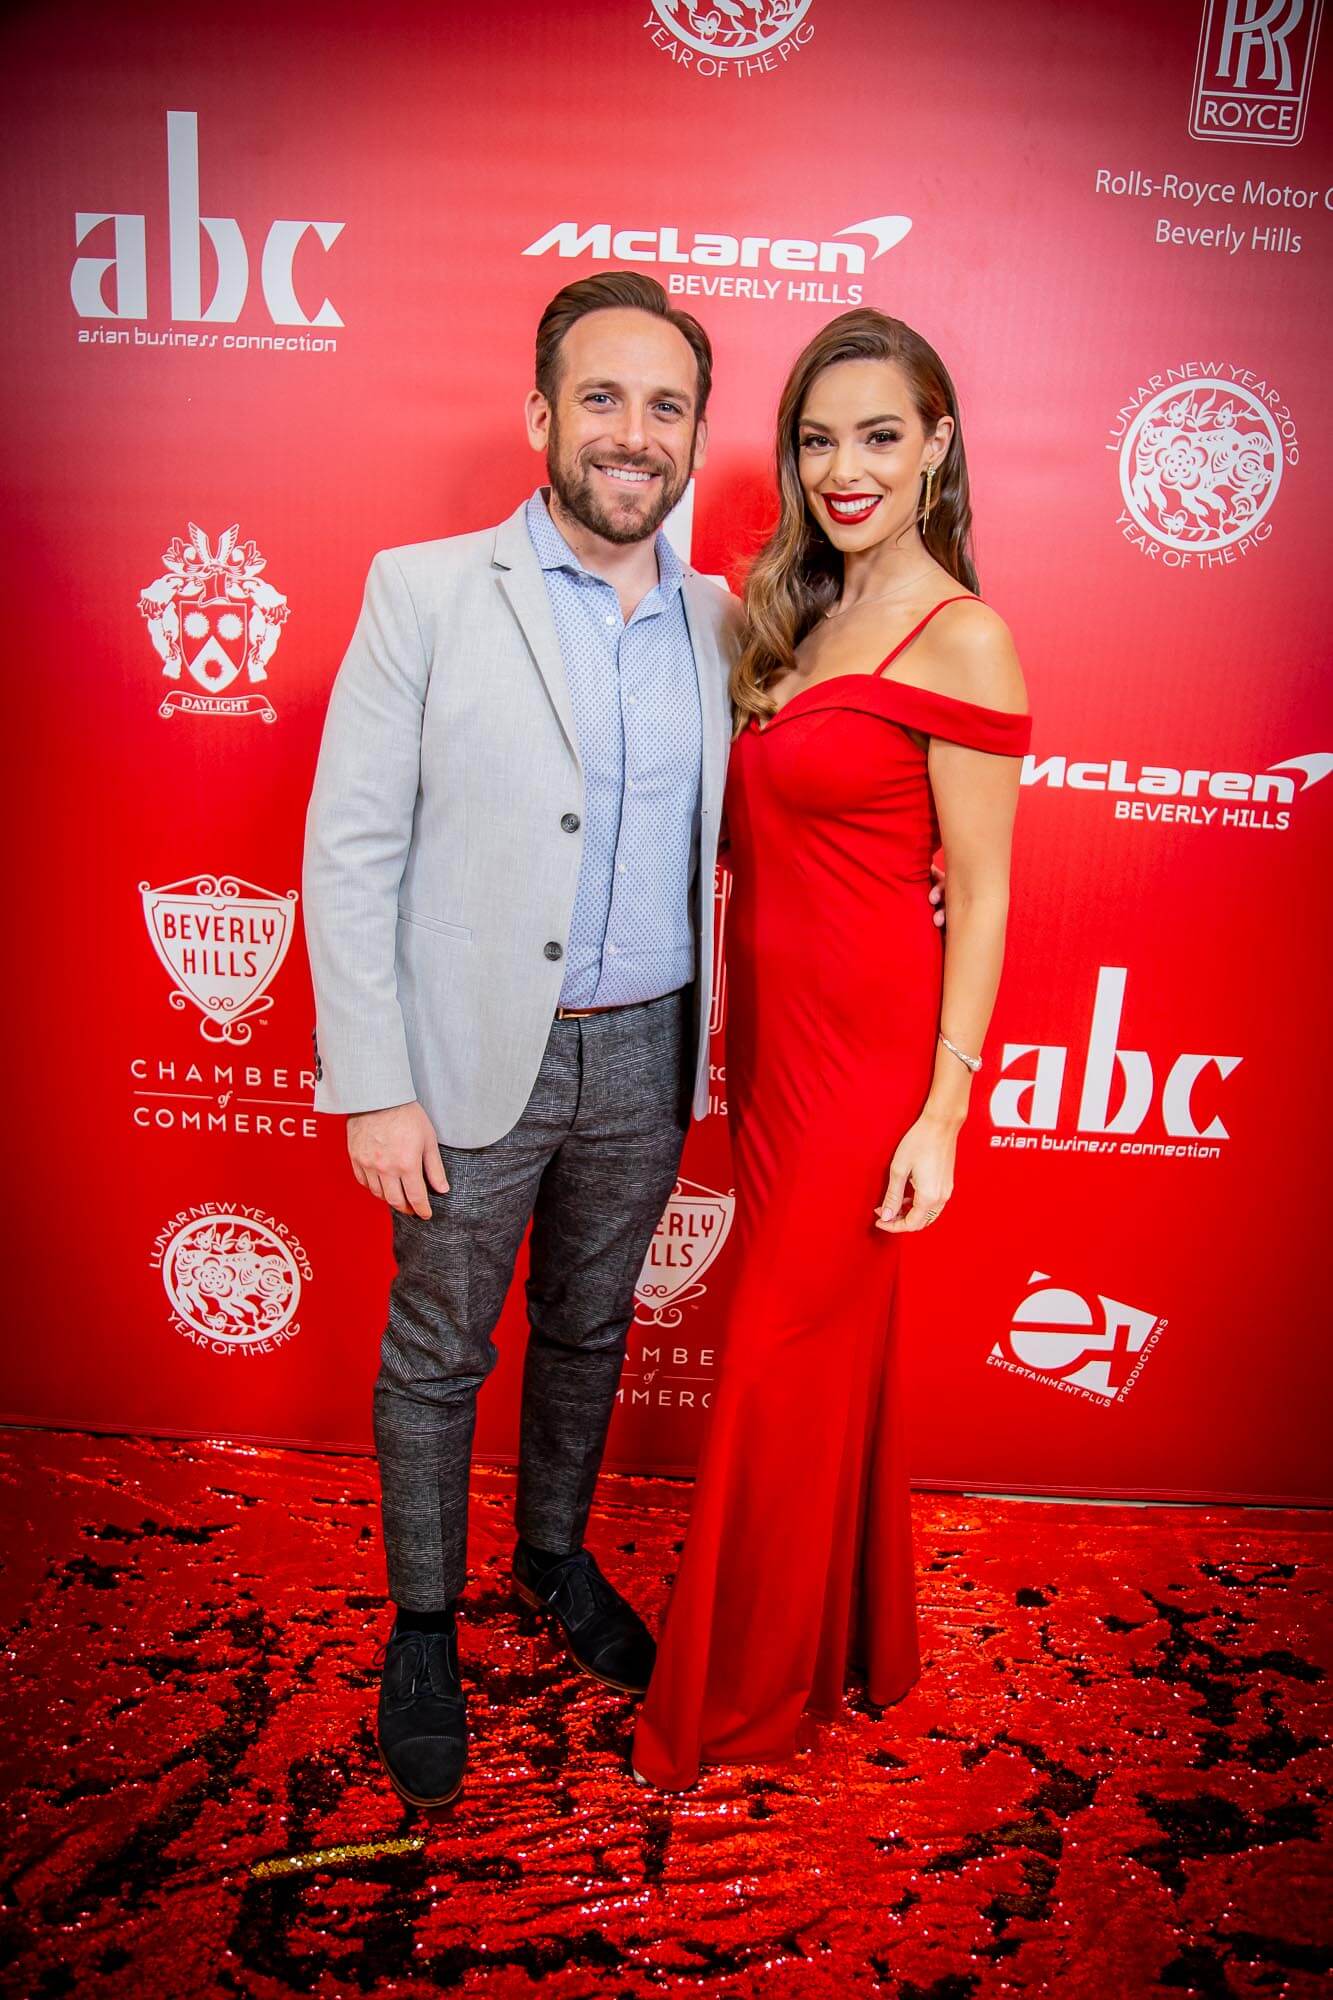 DVR Productions BHCC LUNAR Year 2019 low Res 945